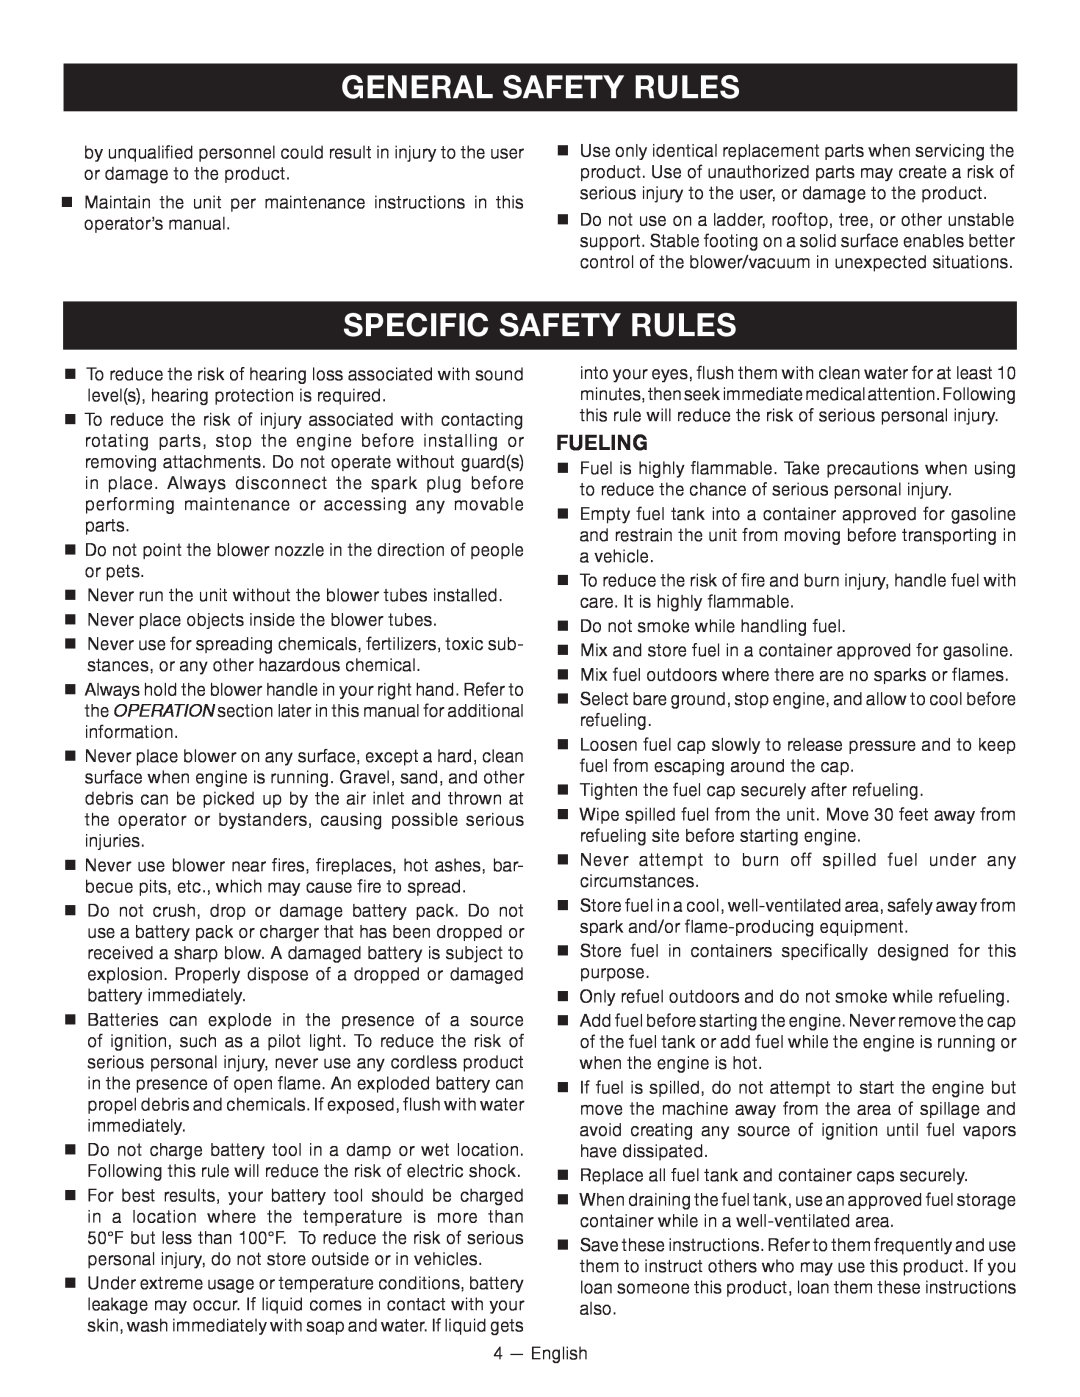 Ryobi RY09605 manuel dutilisation specific SAFETY RULES, fueling, General Safety Rules 